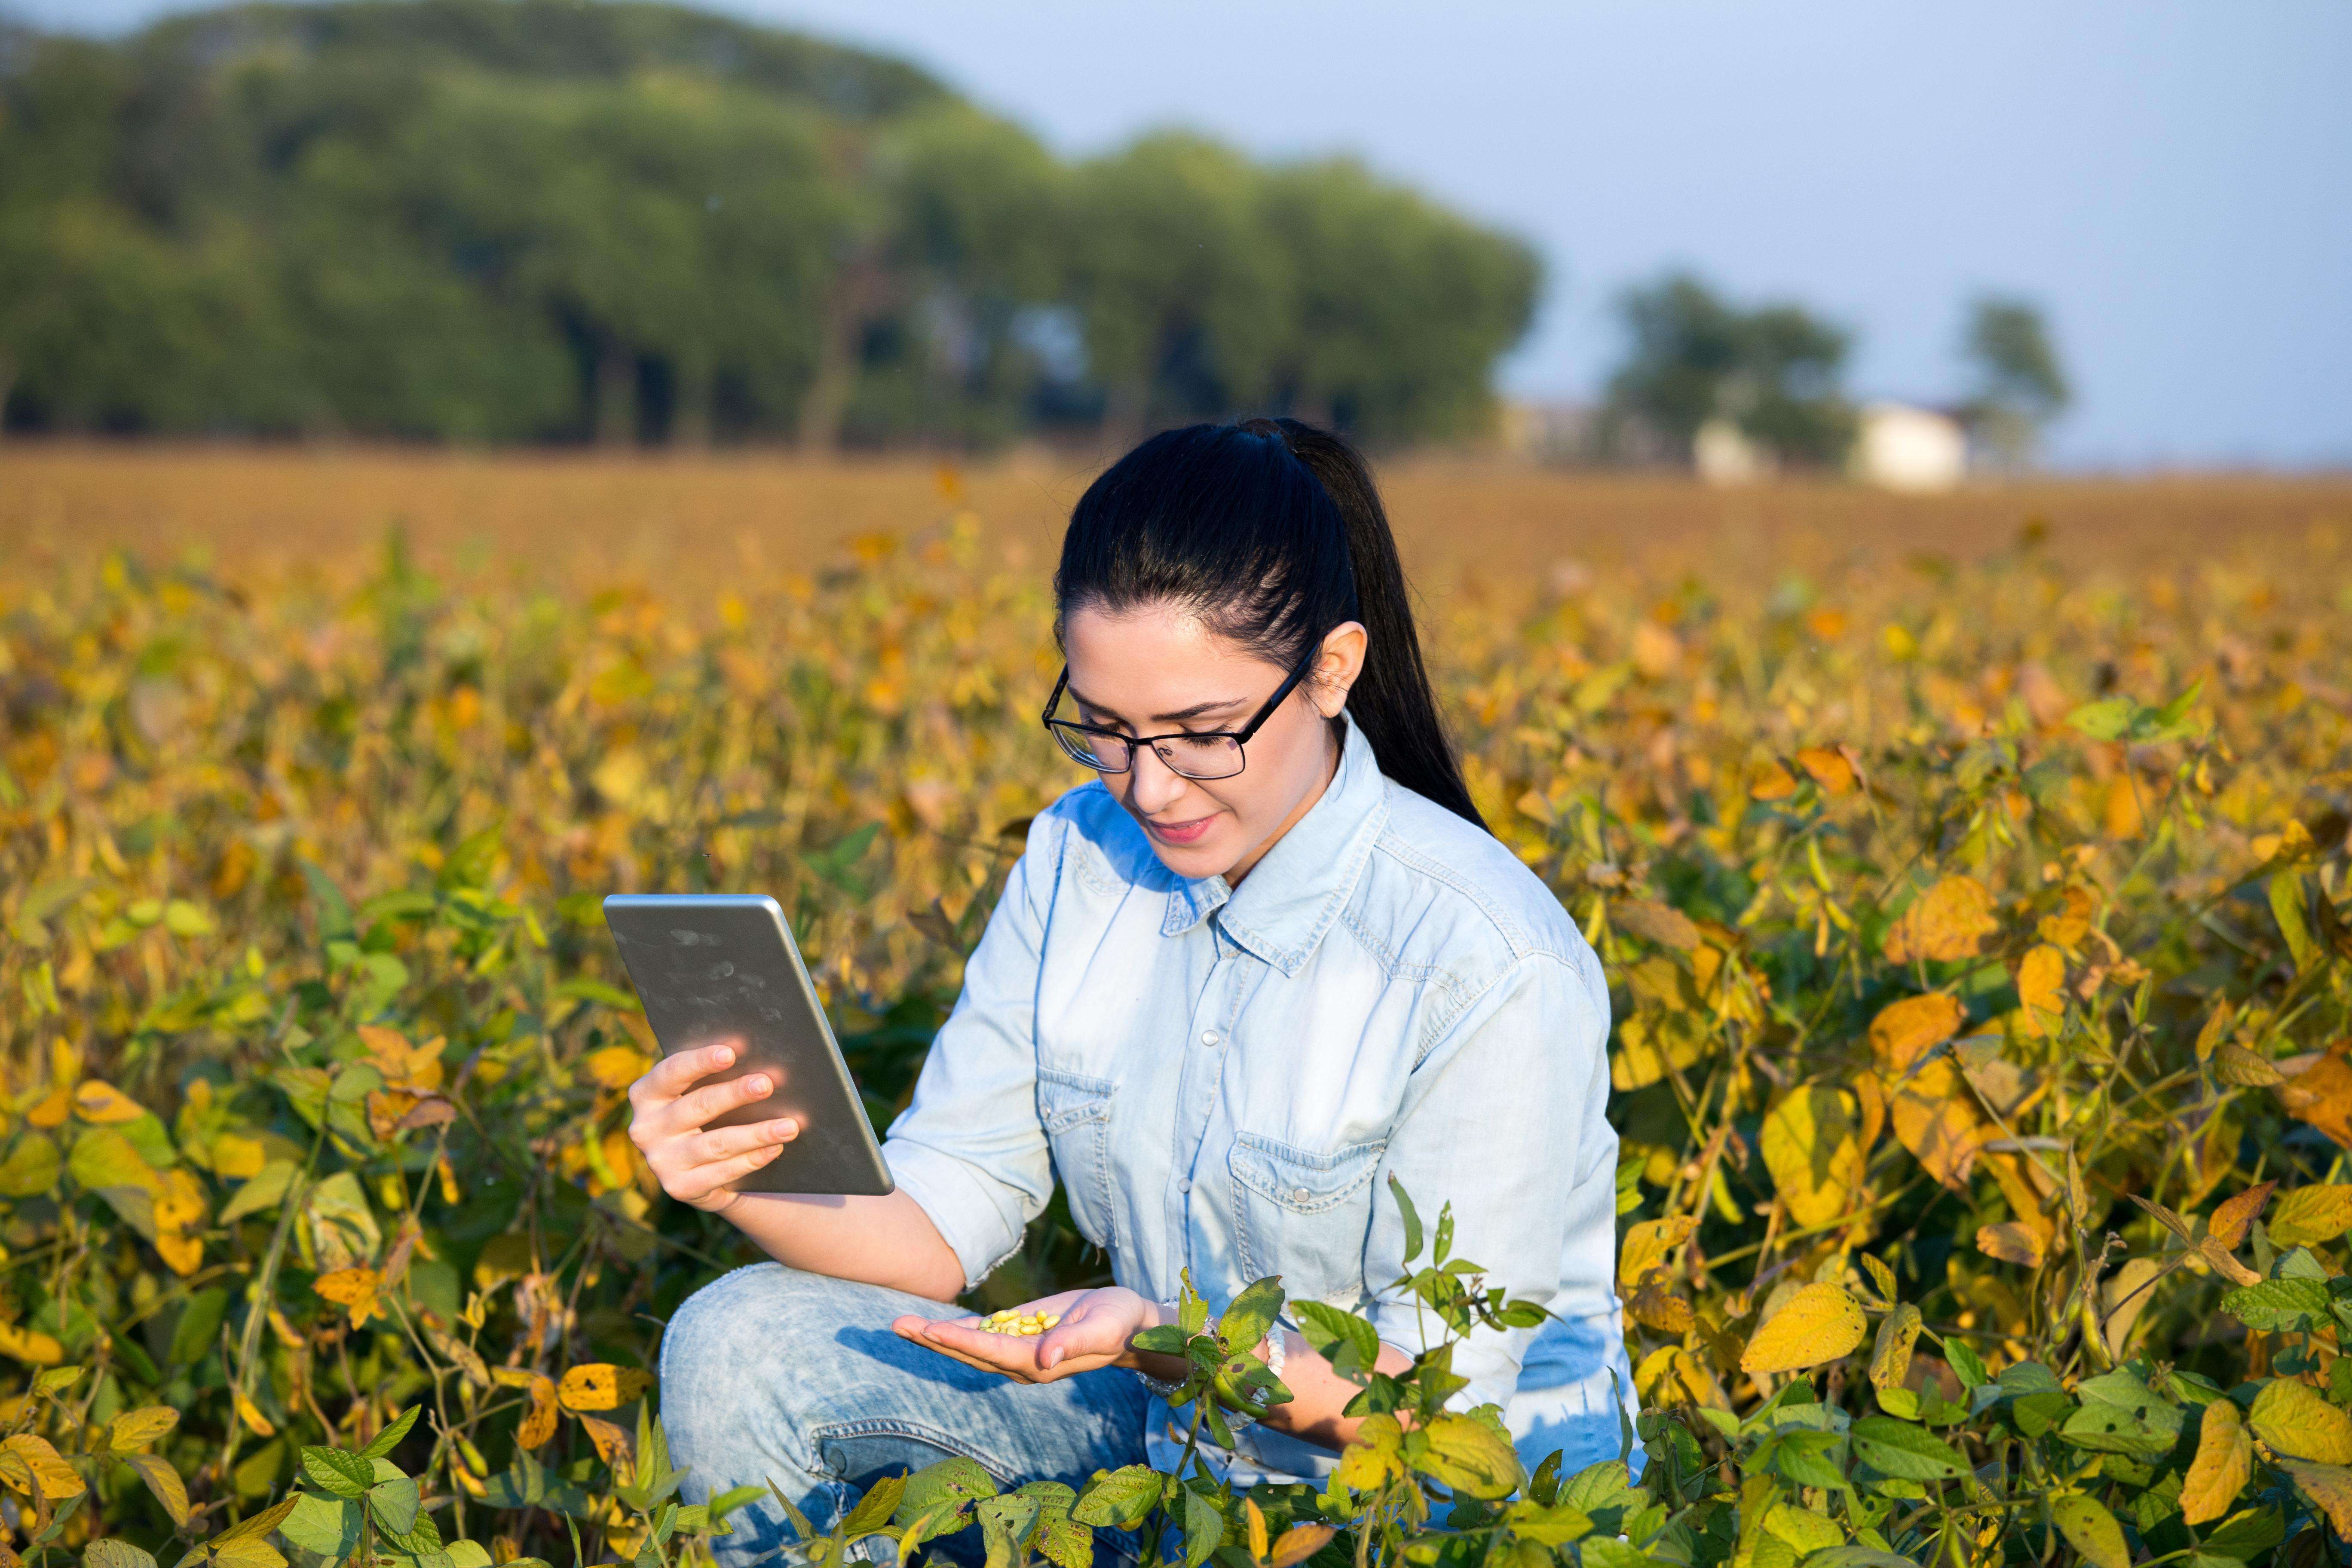  Woman kneeling in a soybean field holding a tablet in one hand and looking at soybeans in her other hand